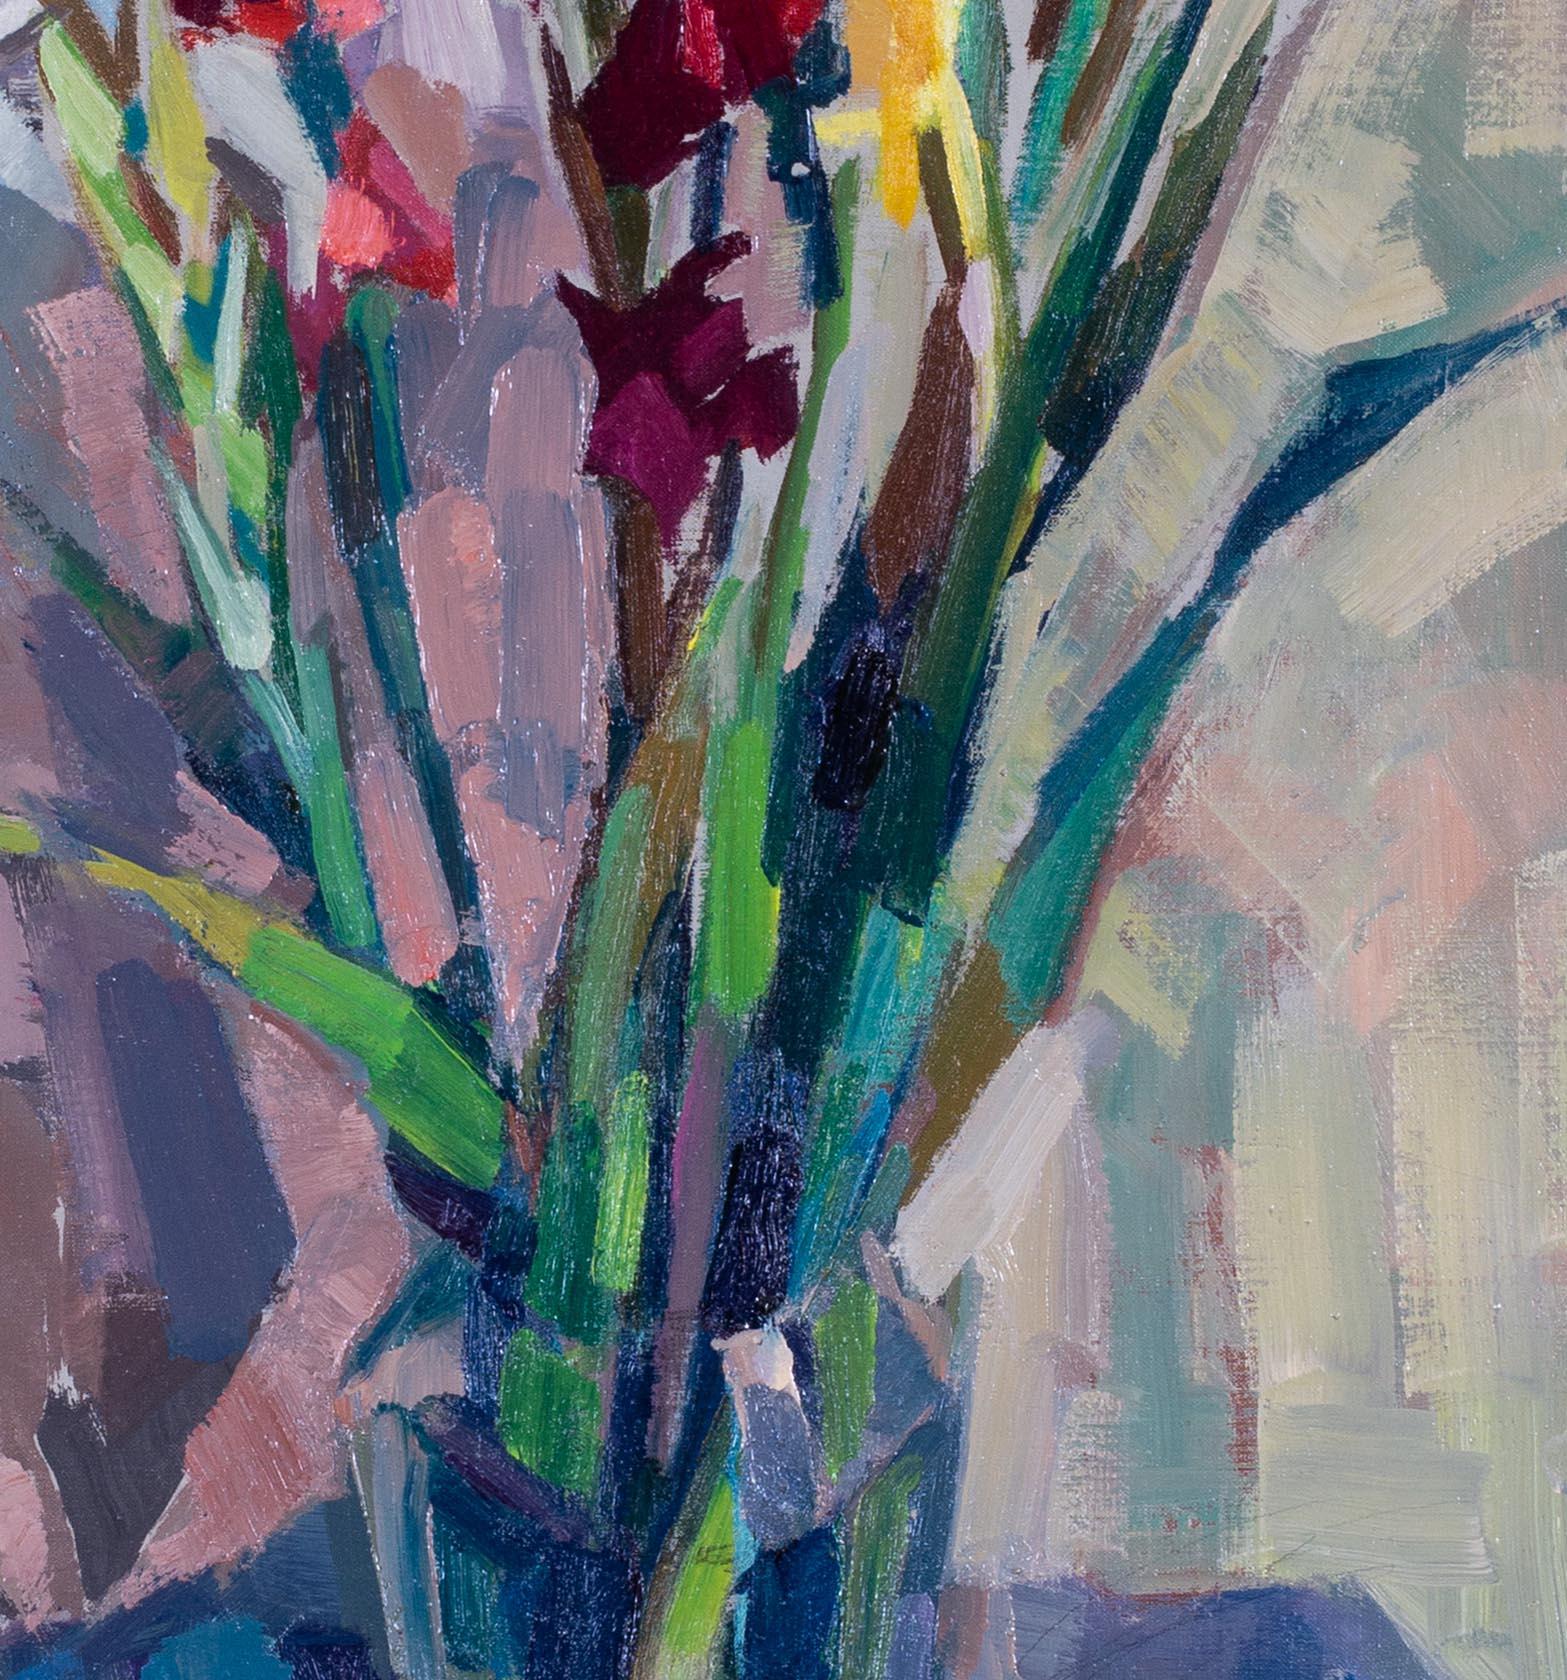 This stunning original Post-Impressionist oil painting features a vibrant vase of red, white and yellow gladioli. The bold, broad brushstrokes contribute to the excitement of the piece, while the juxtaposition of strong red and yellow tones creates